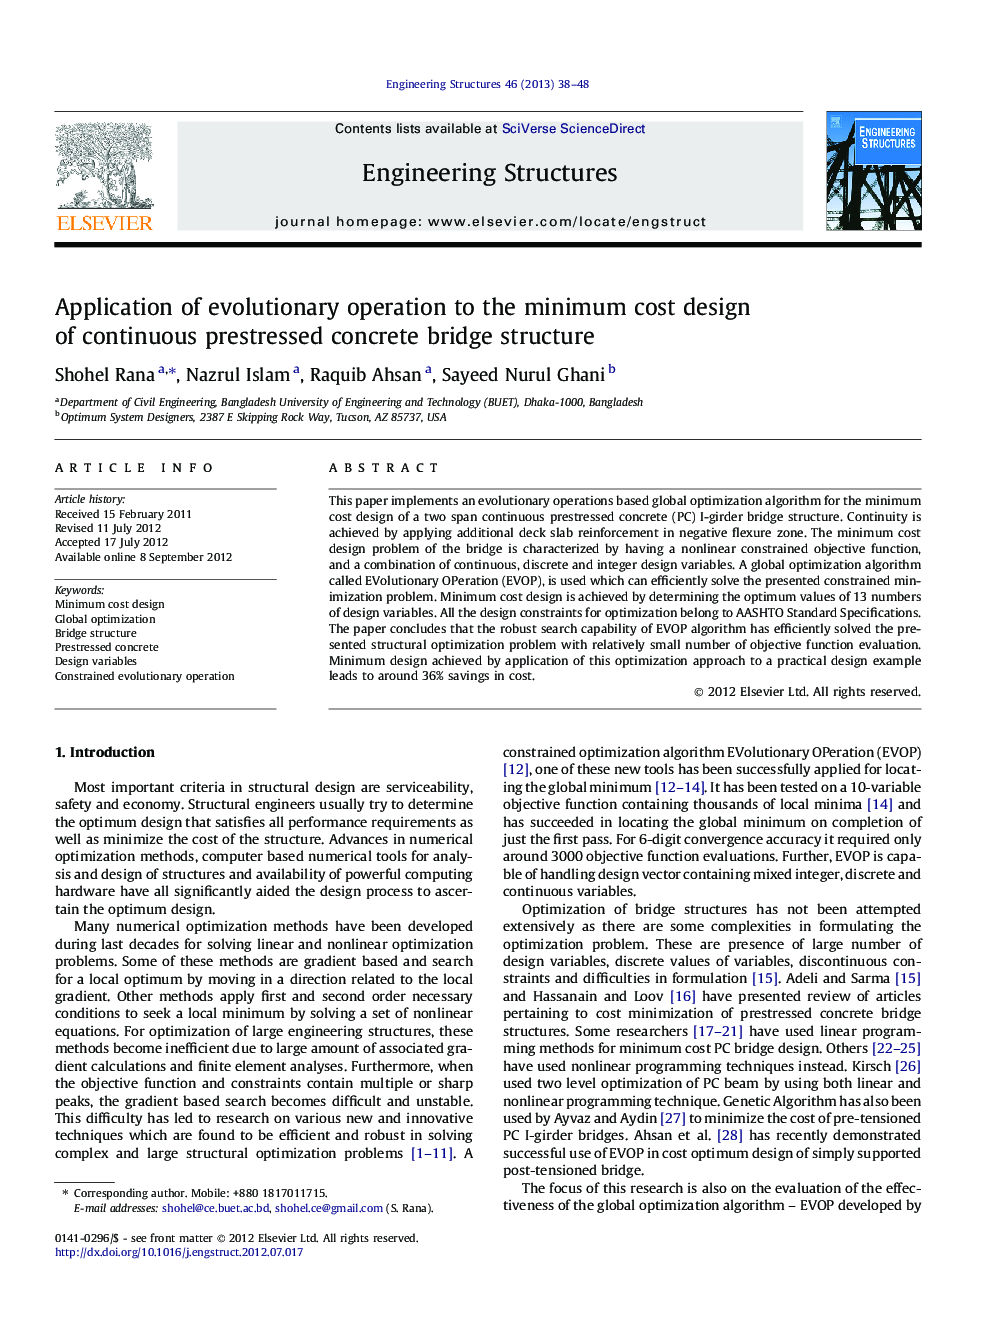 Application of evolutionary operation to the minimum cost design of continuous prestressed concrete bridge structure